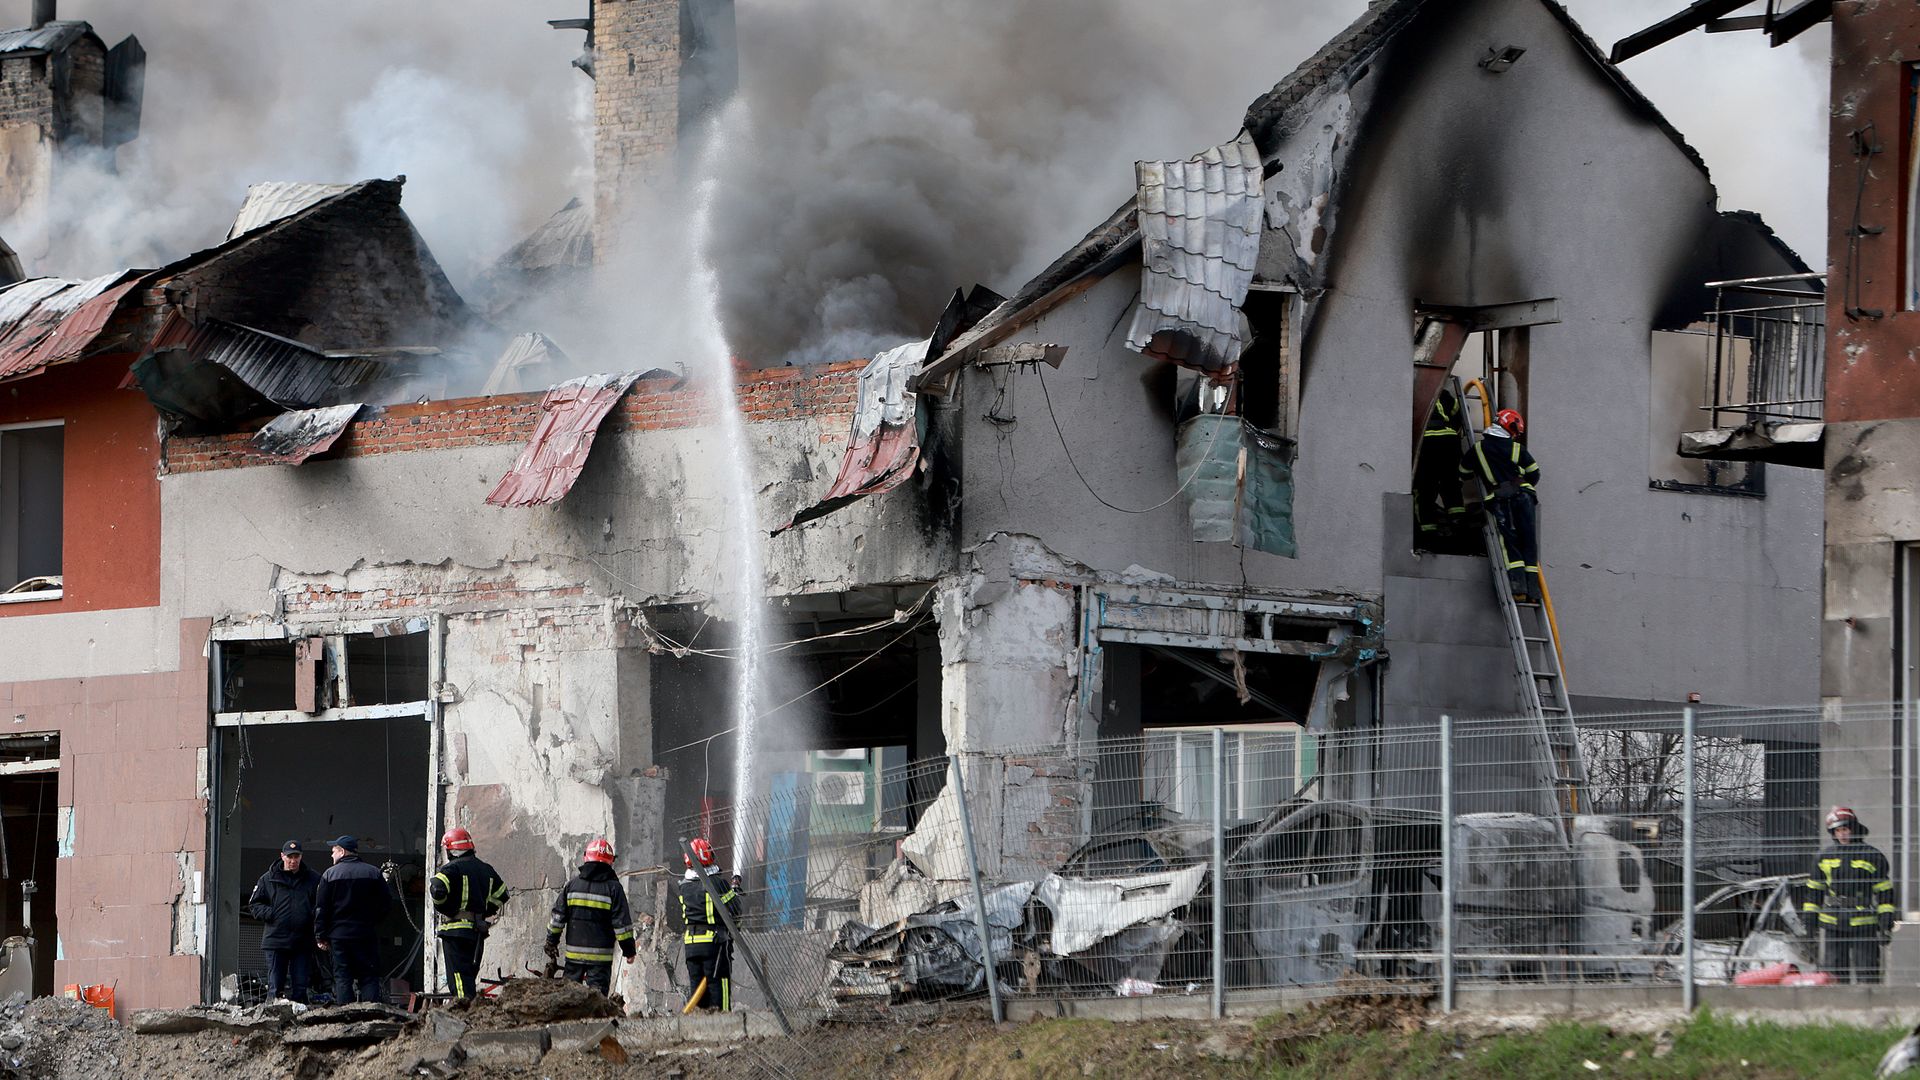 Firefighters battle a blaze after a civilian building was hit by a Russian missile on April 18, 2022 in Lviv, Ukraine.